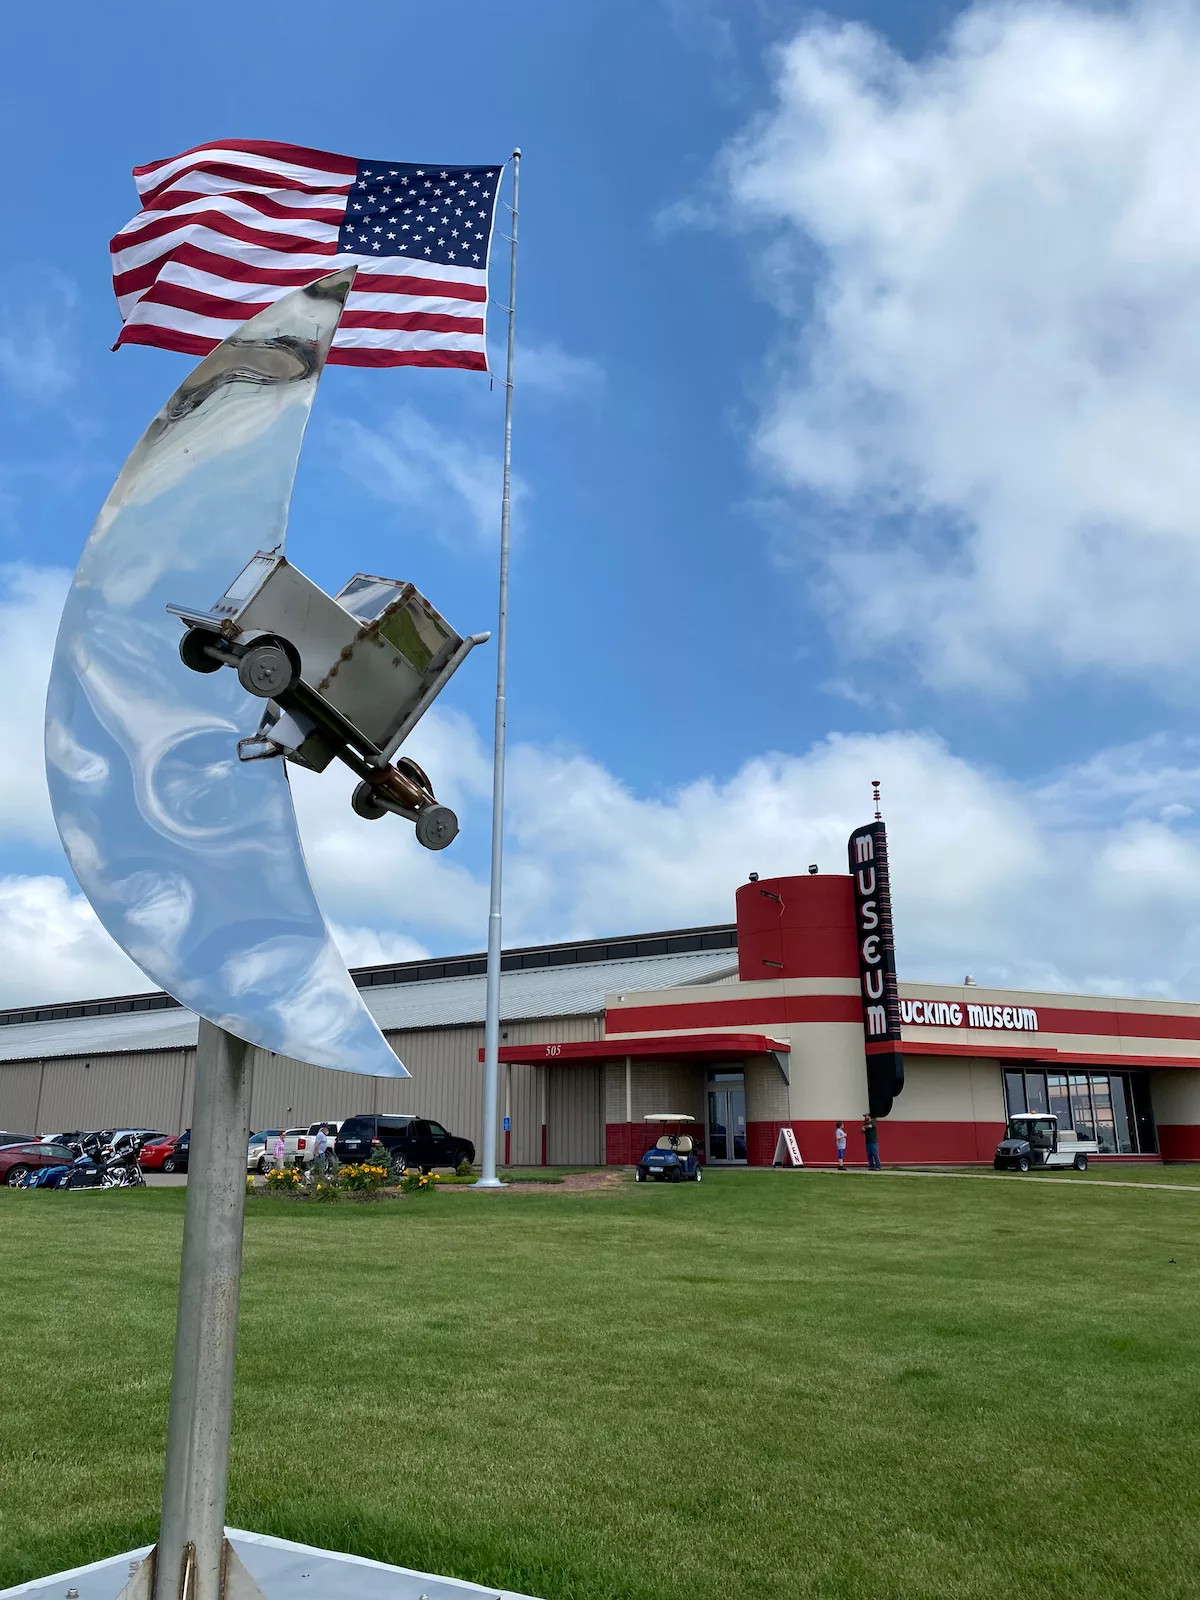 Sculpture and American flag in front of Iowa 80 Trucking Museum at the World's Largest Truckstop in Walcott, Iowa